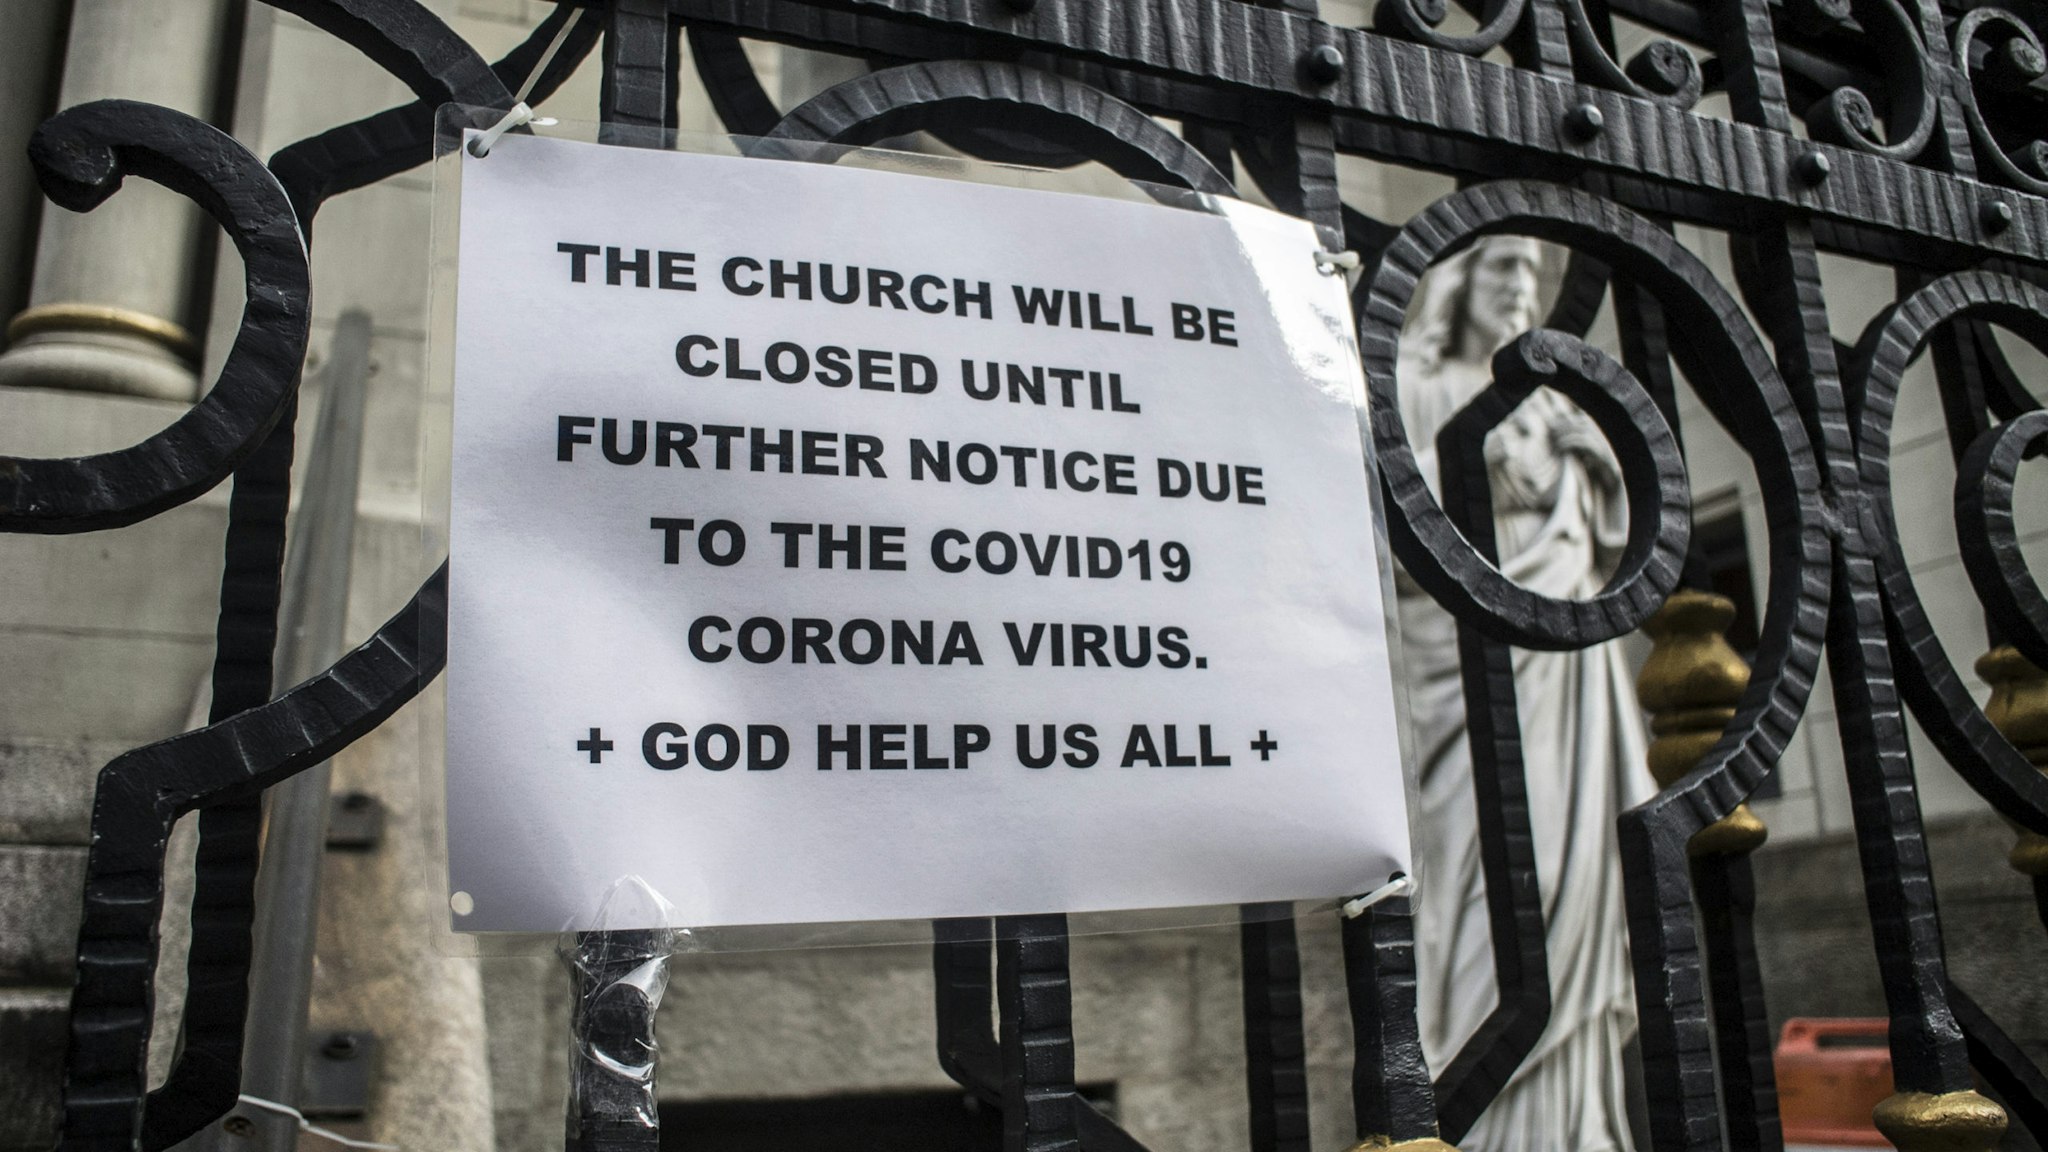 NEW YORK, NY - March 18 MANDATORY CREDIT Bill Tompkins/Getty Images Church closing due to the coronavirus COVID-19 pandemic on March 18, 2020 in New York City. (Photo by Bill Tompkins/Getty Images)